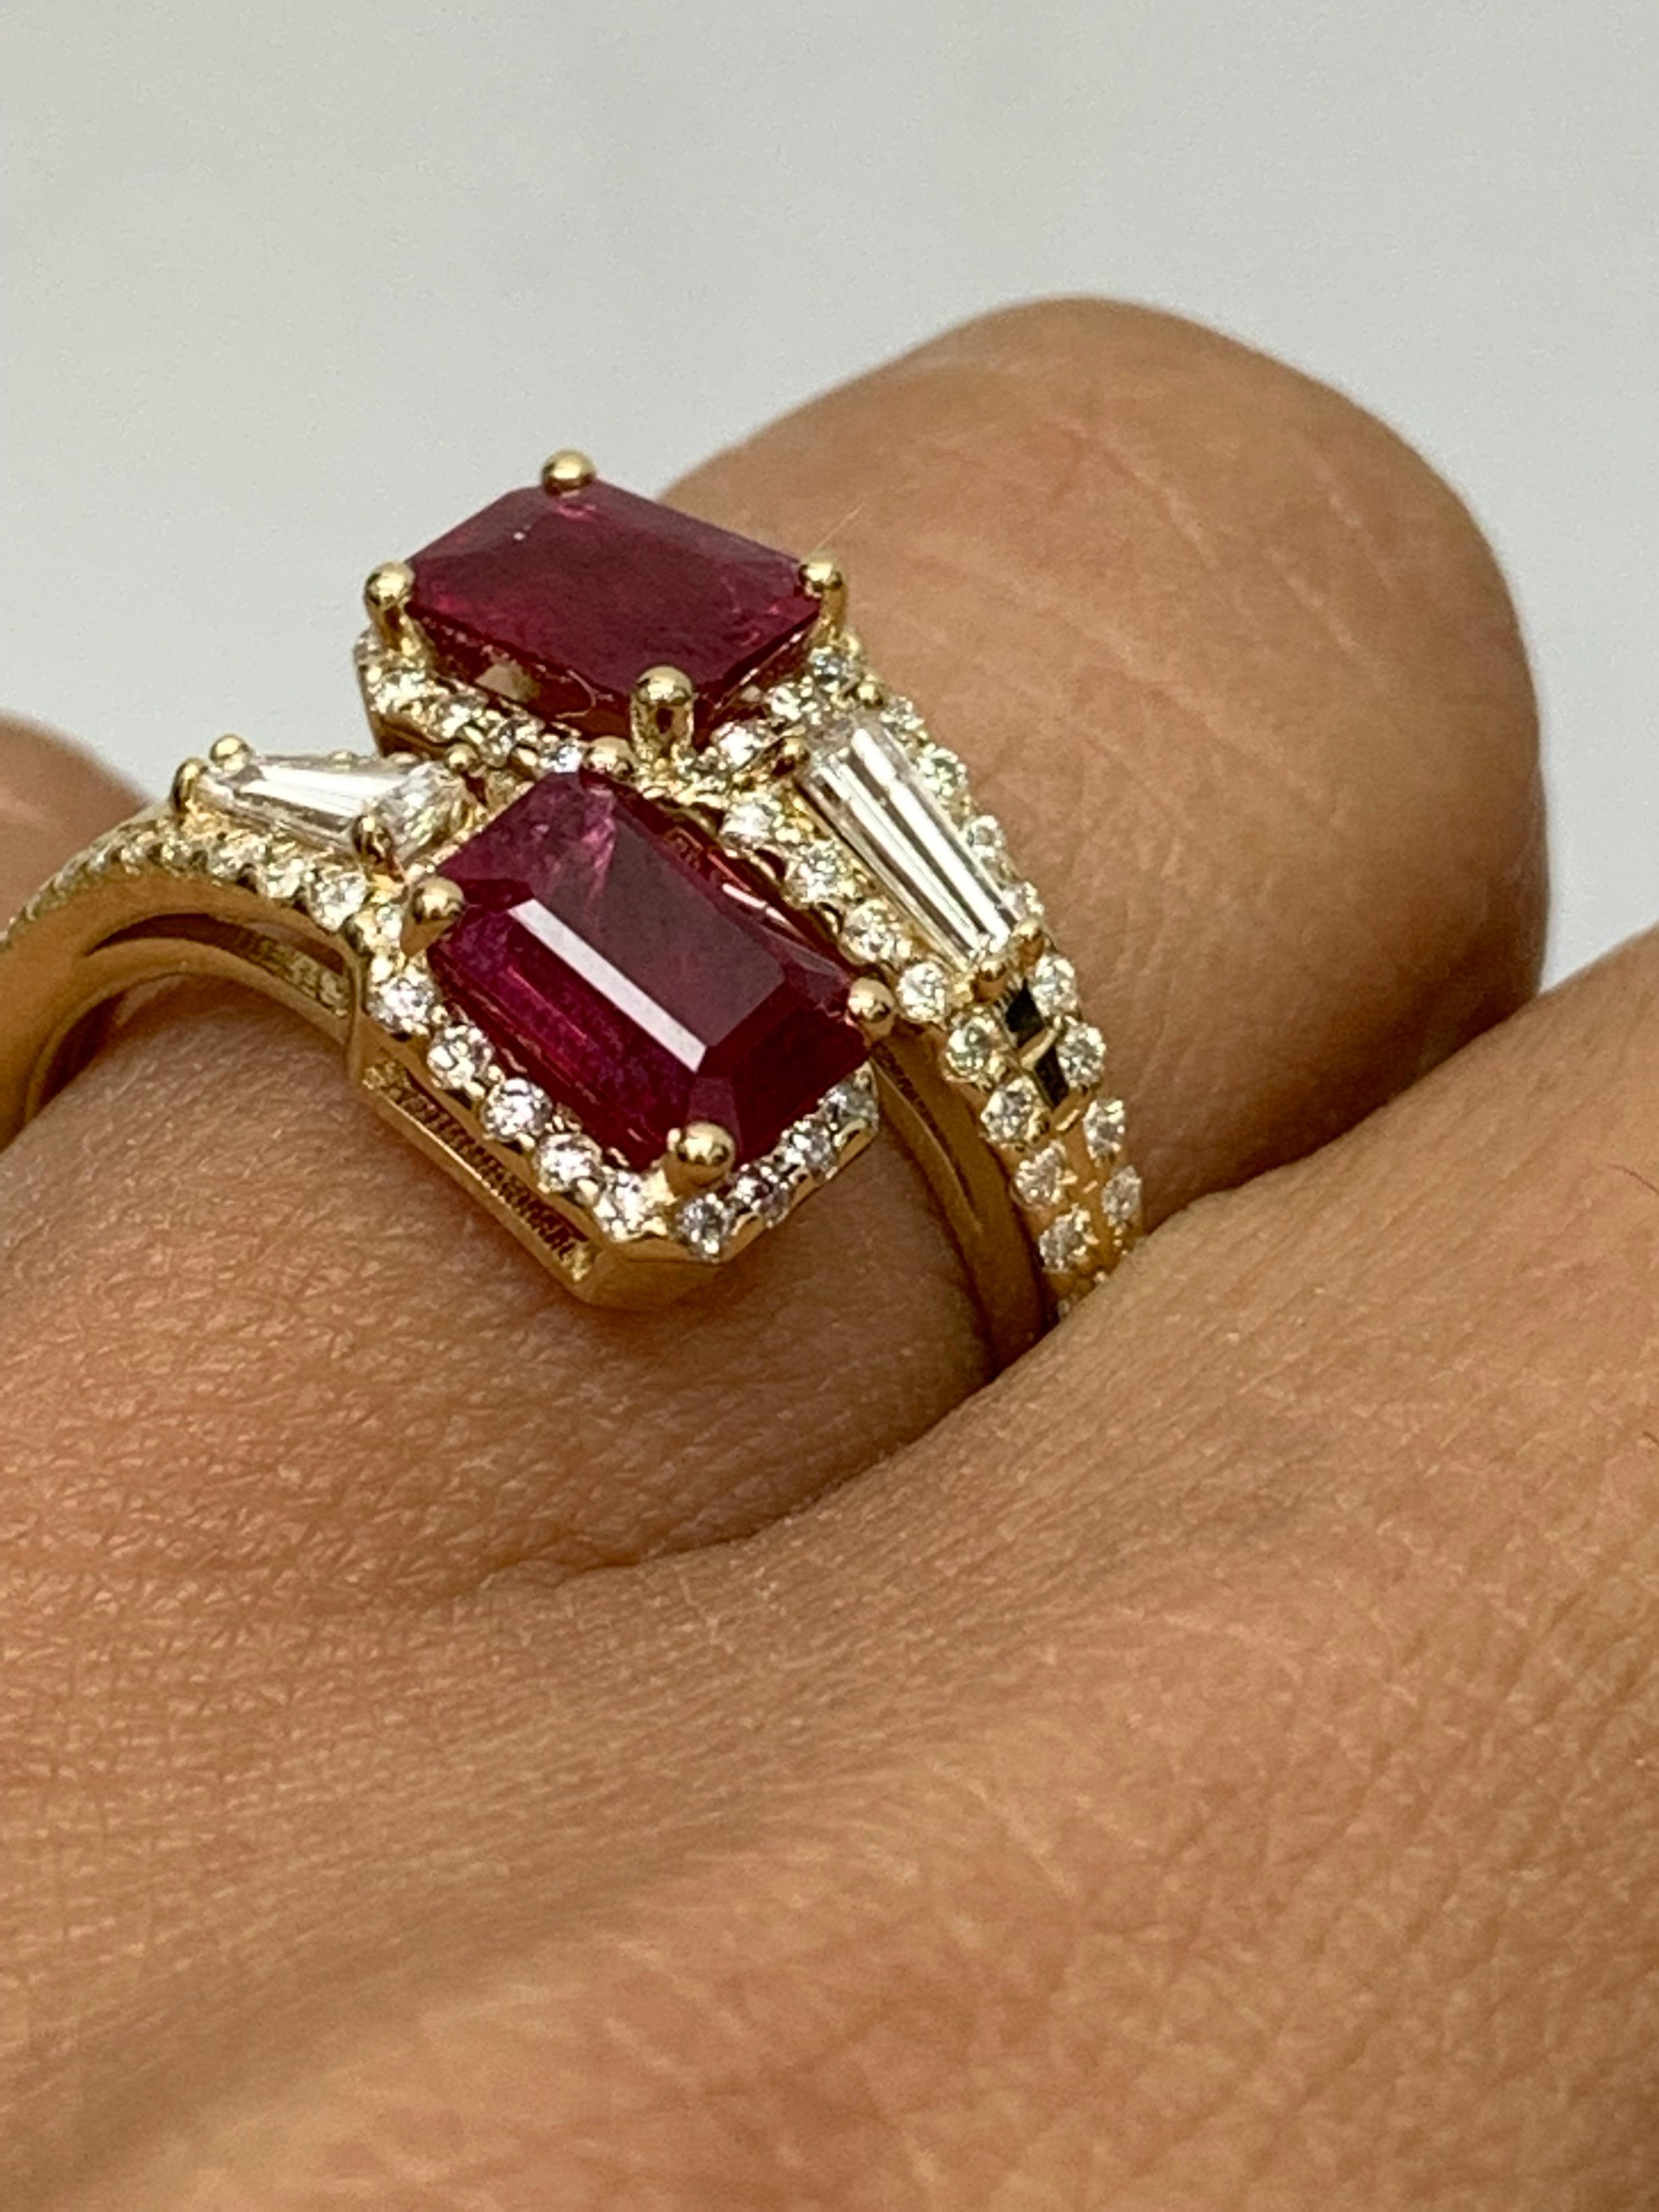 2.18 Carat Emerald Cut Ruby Diamond Toi et Moi Engagement Ring 14K Yellow Gold For Sale 1